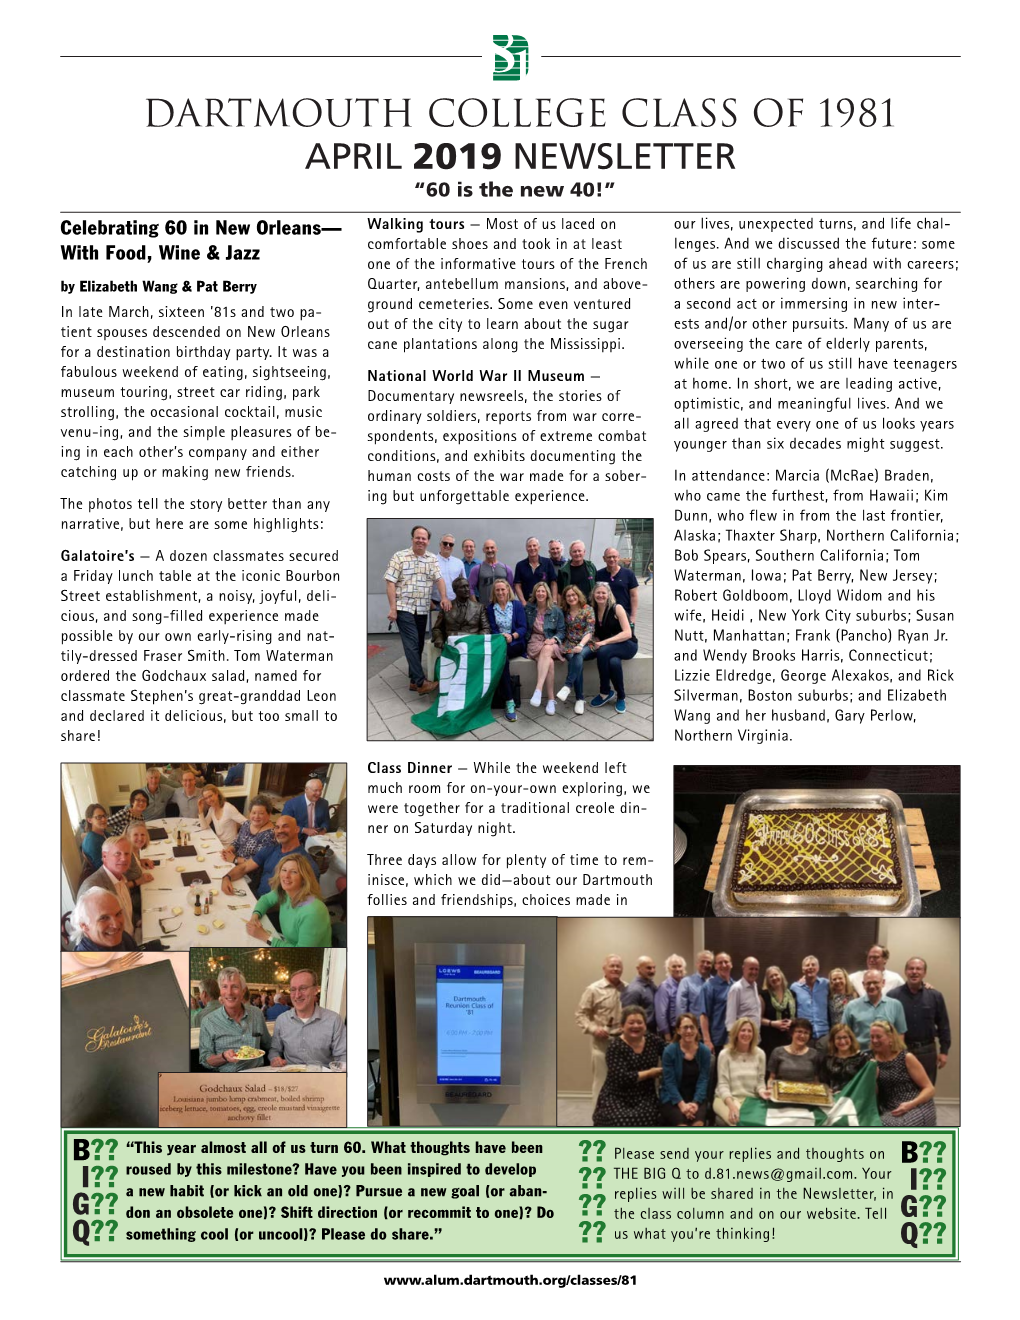 Dartmouth College Class of 1981 April 2019 Newsletter